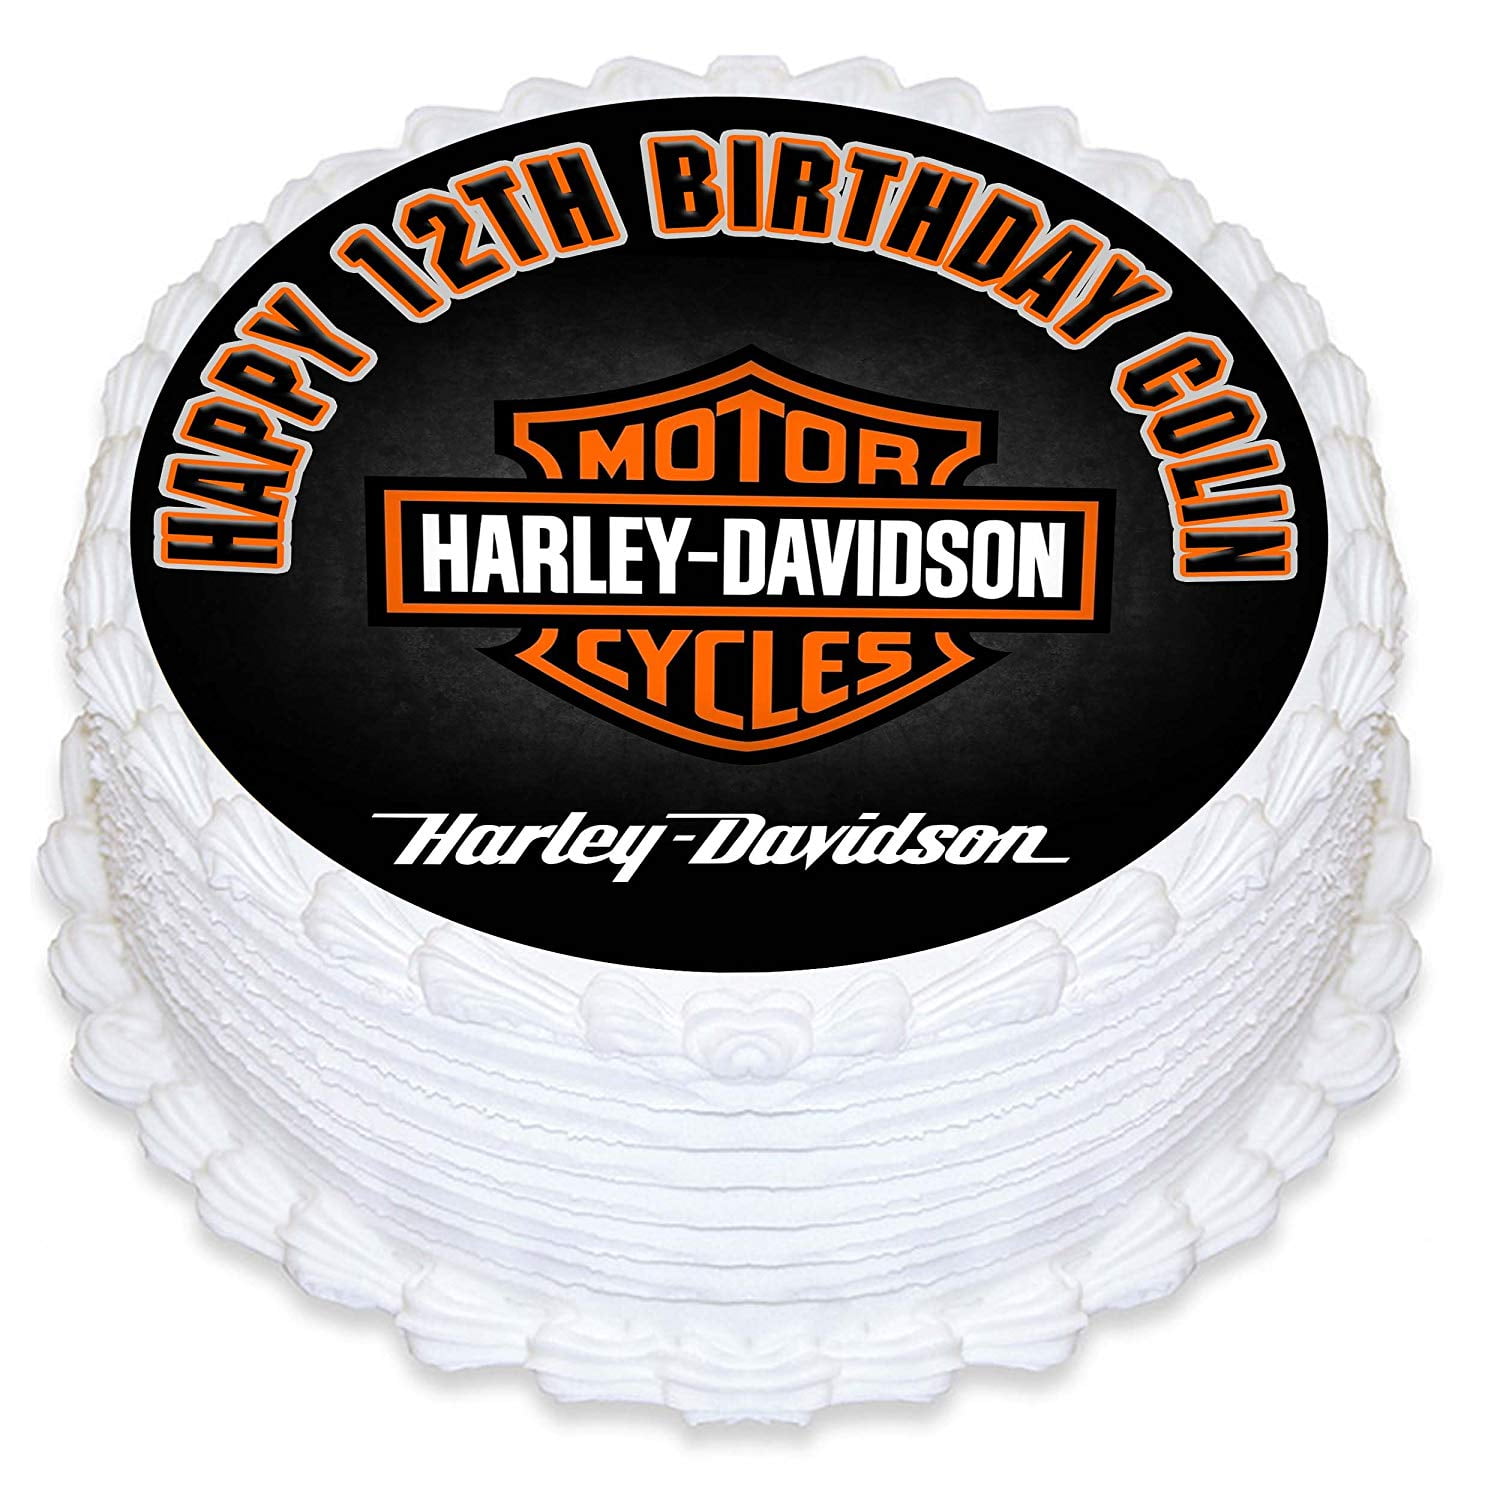 Harley Davidson Edible Cake Image Topper Personalized Picture 8 Inches Round Walmart Com